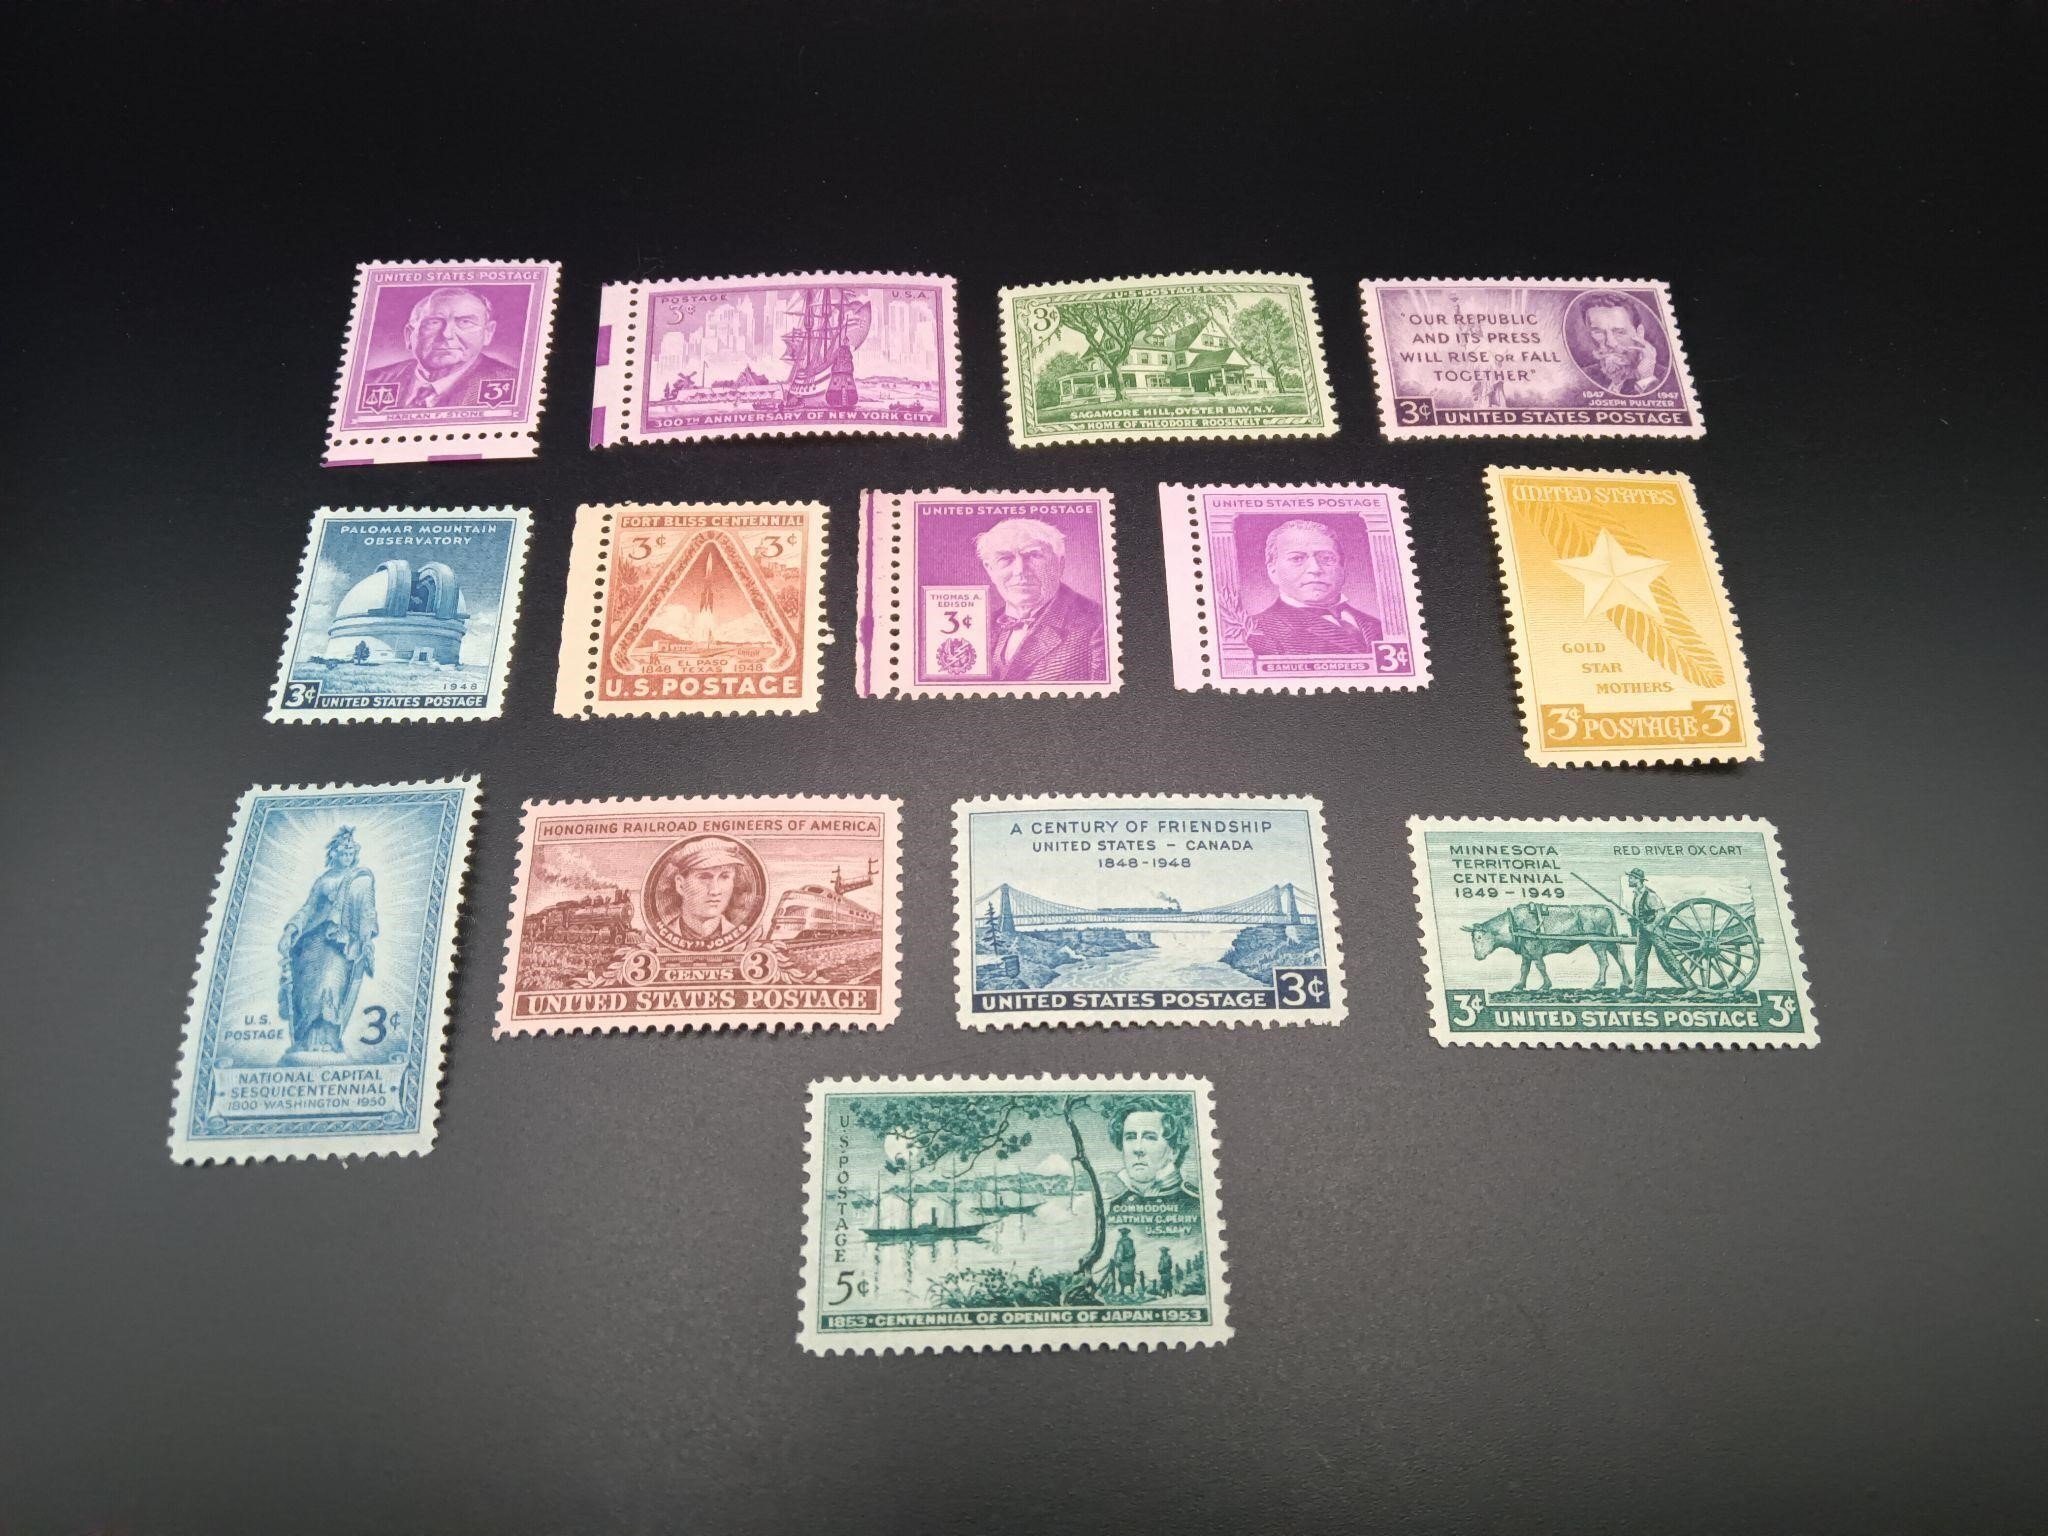 3 Cent Stamp Lot (x14) - Clean